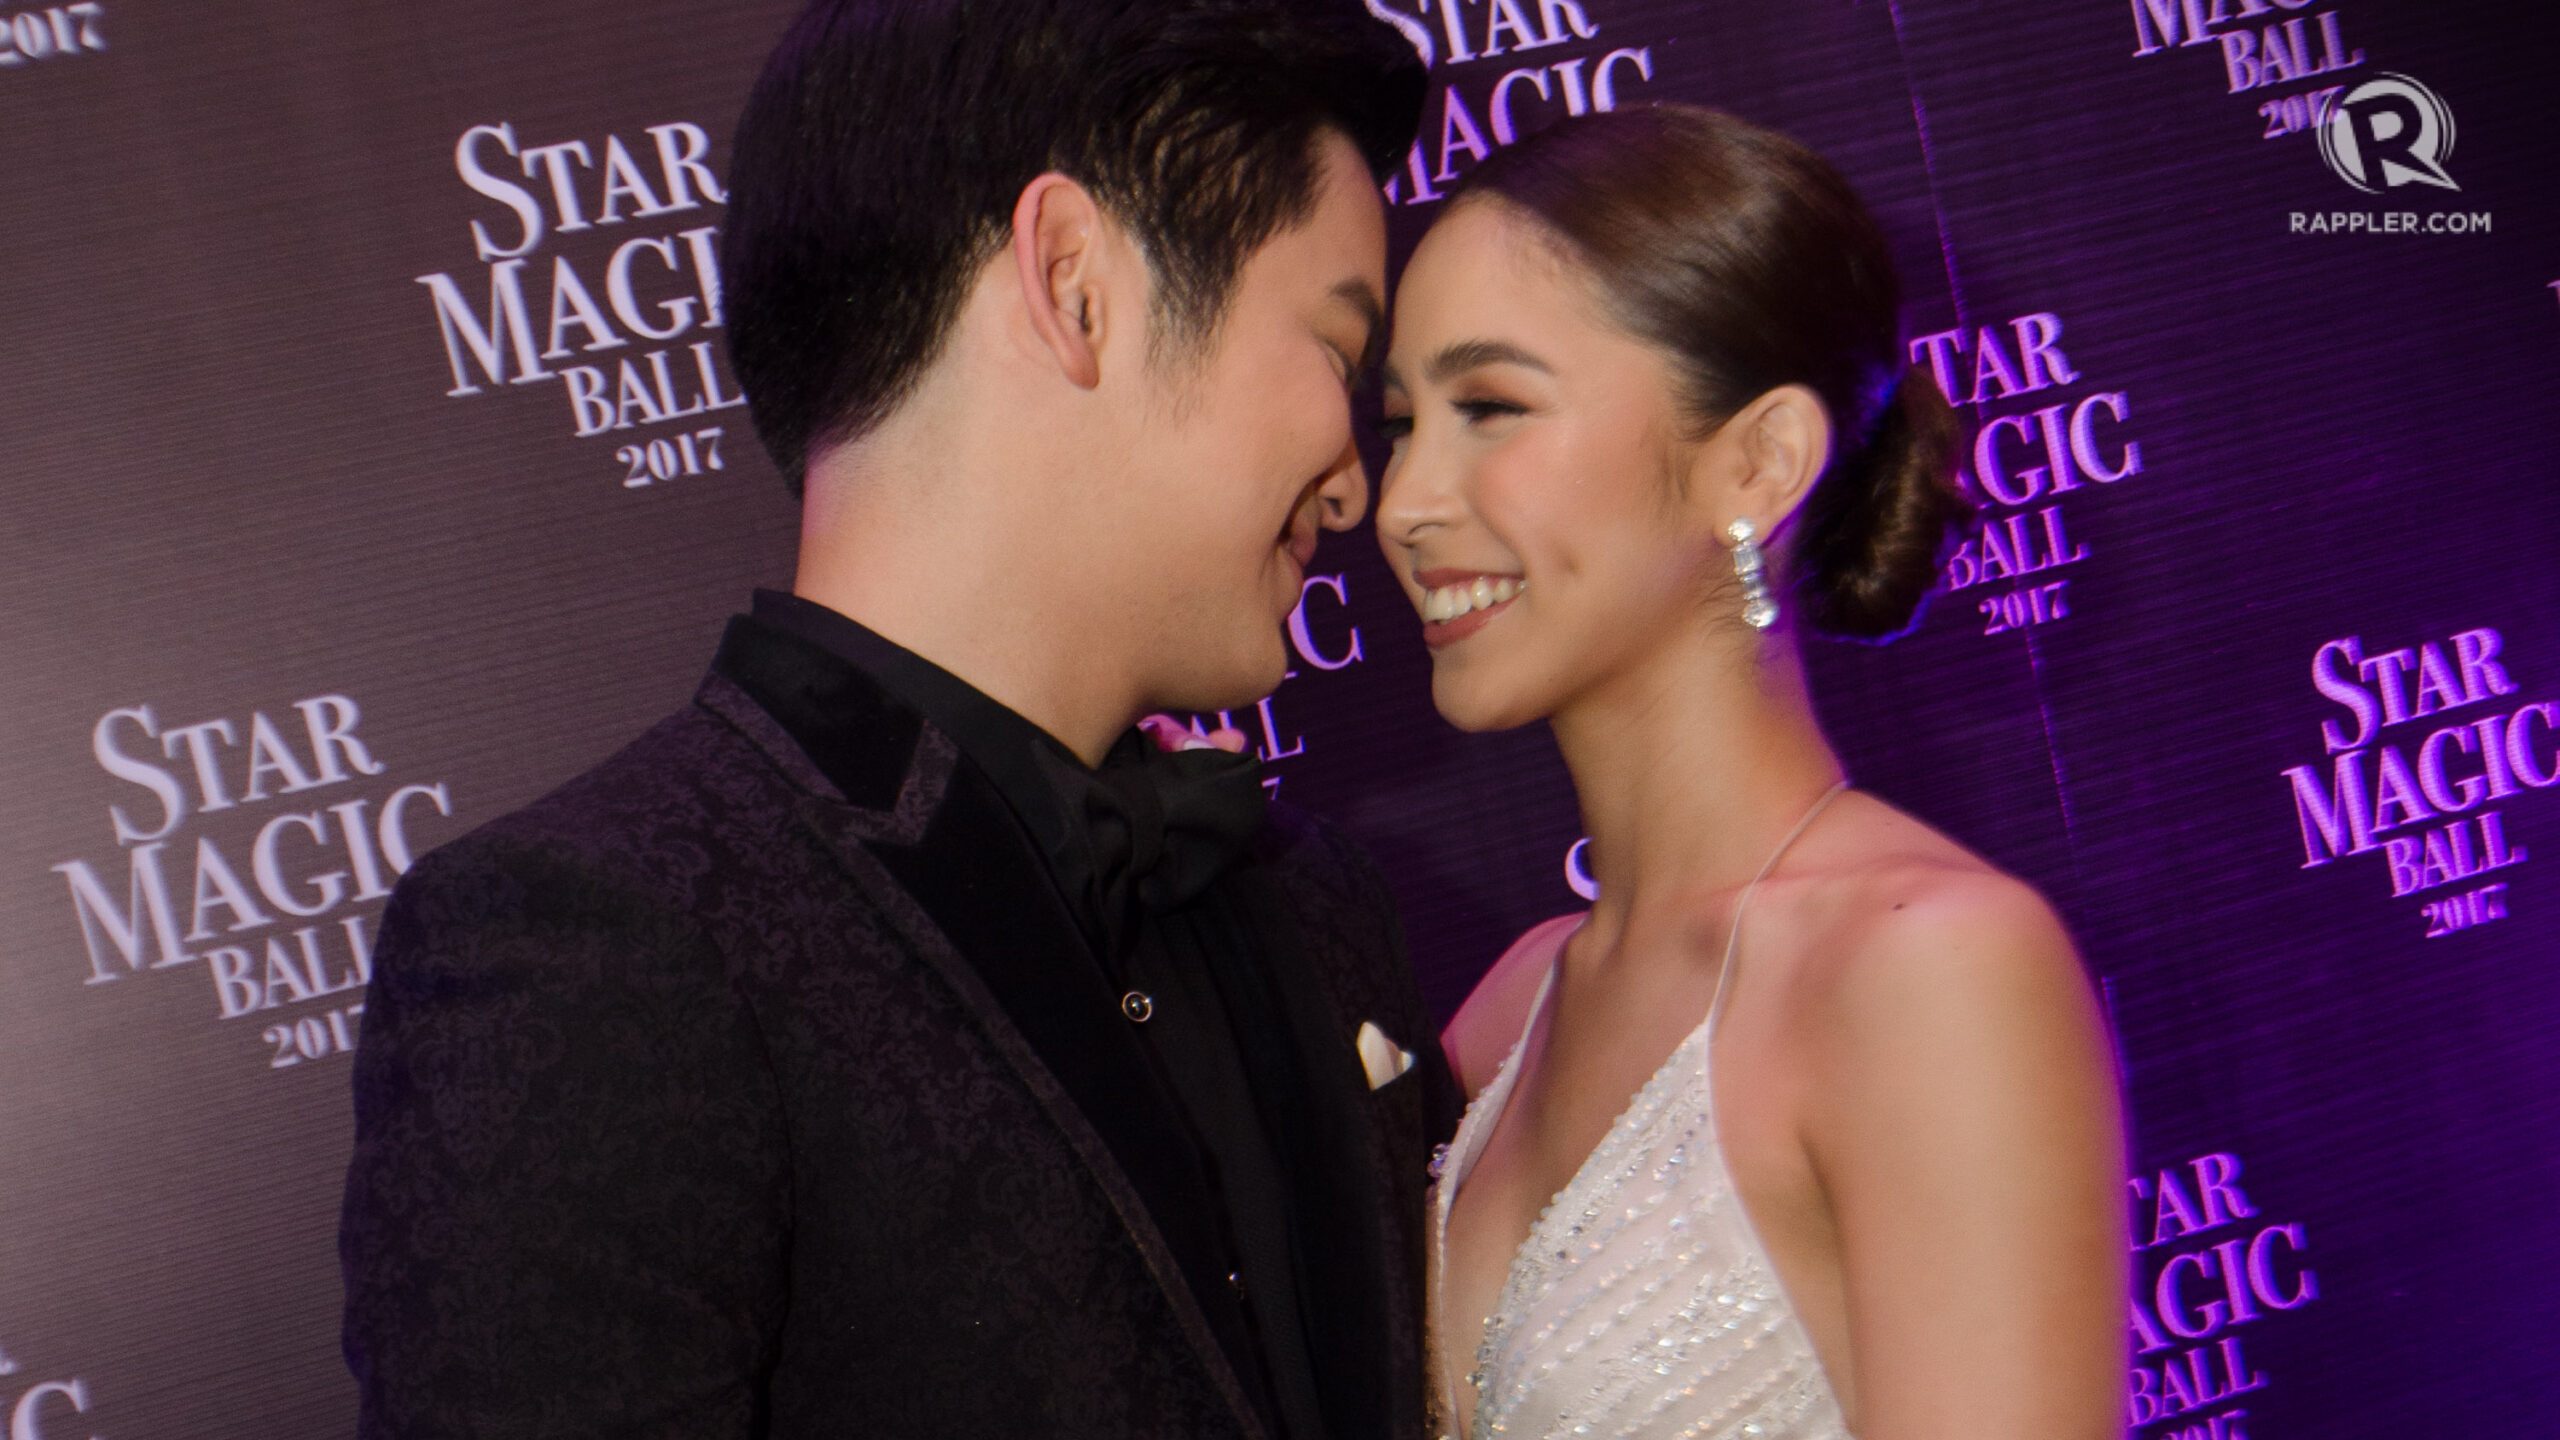 IN PHOTOS: All the red carpet looks at Star Magic Ball 2017